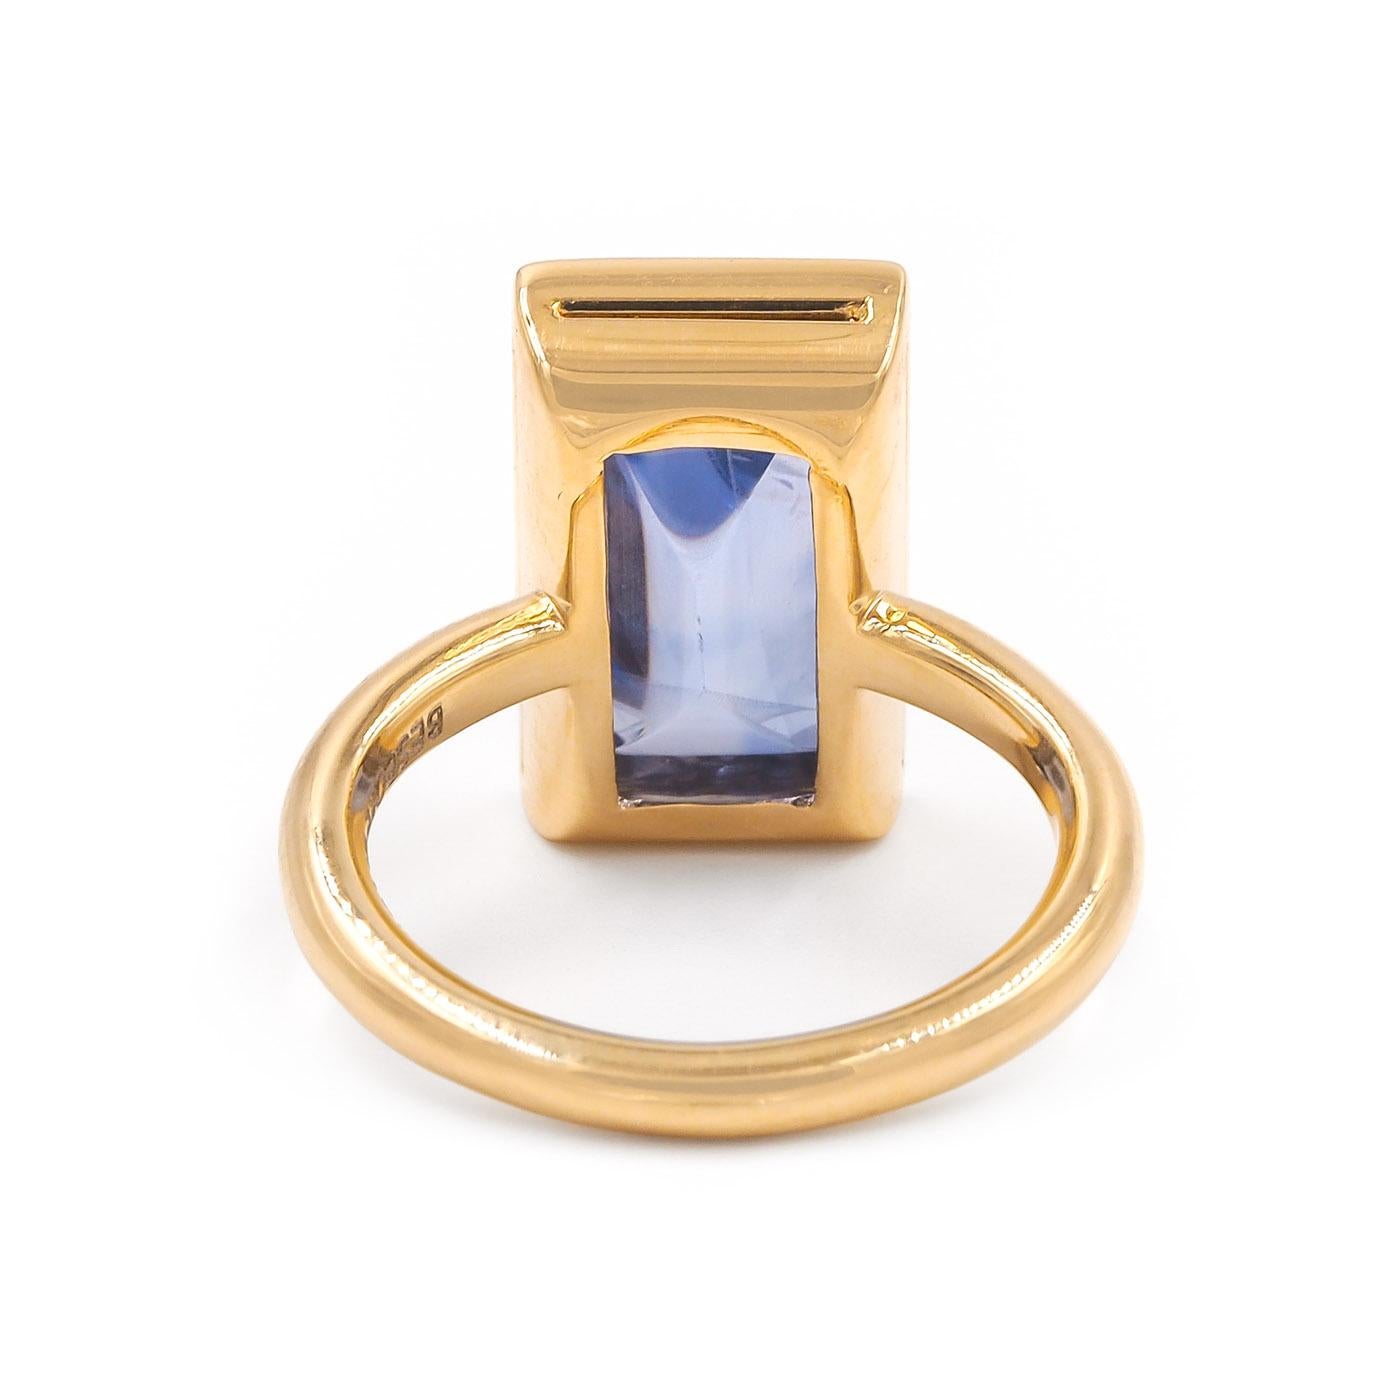 Square Cut 6.50 Carat Ceylon AGL Certified Blue Sapphire Ring from Bespoke by Platt For Sale